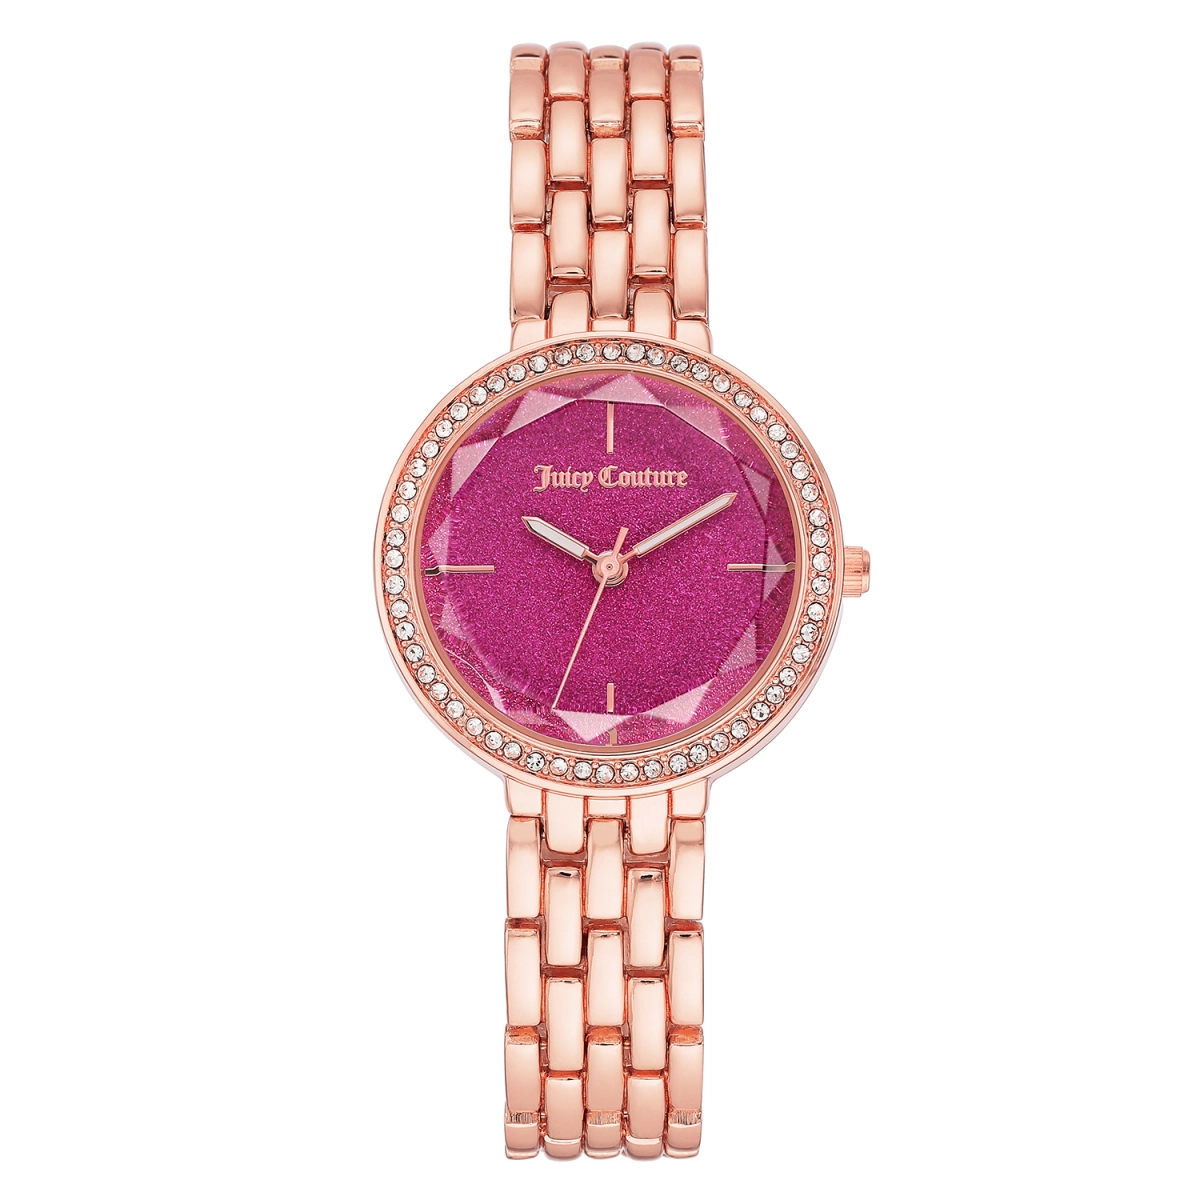 RELOJ ANALOGICO DE MUJER JUICY COUTURE JC1208HPRG